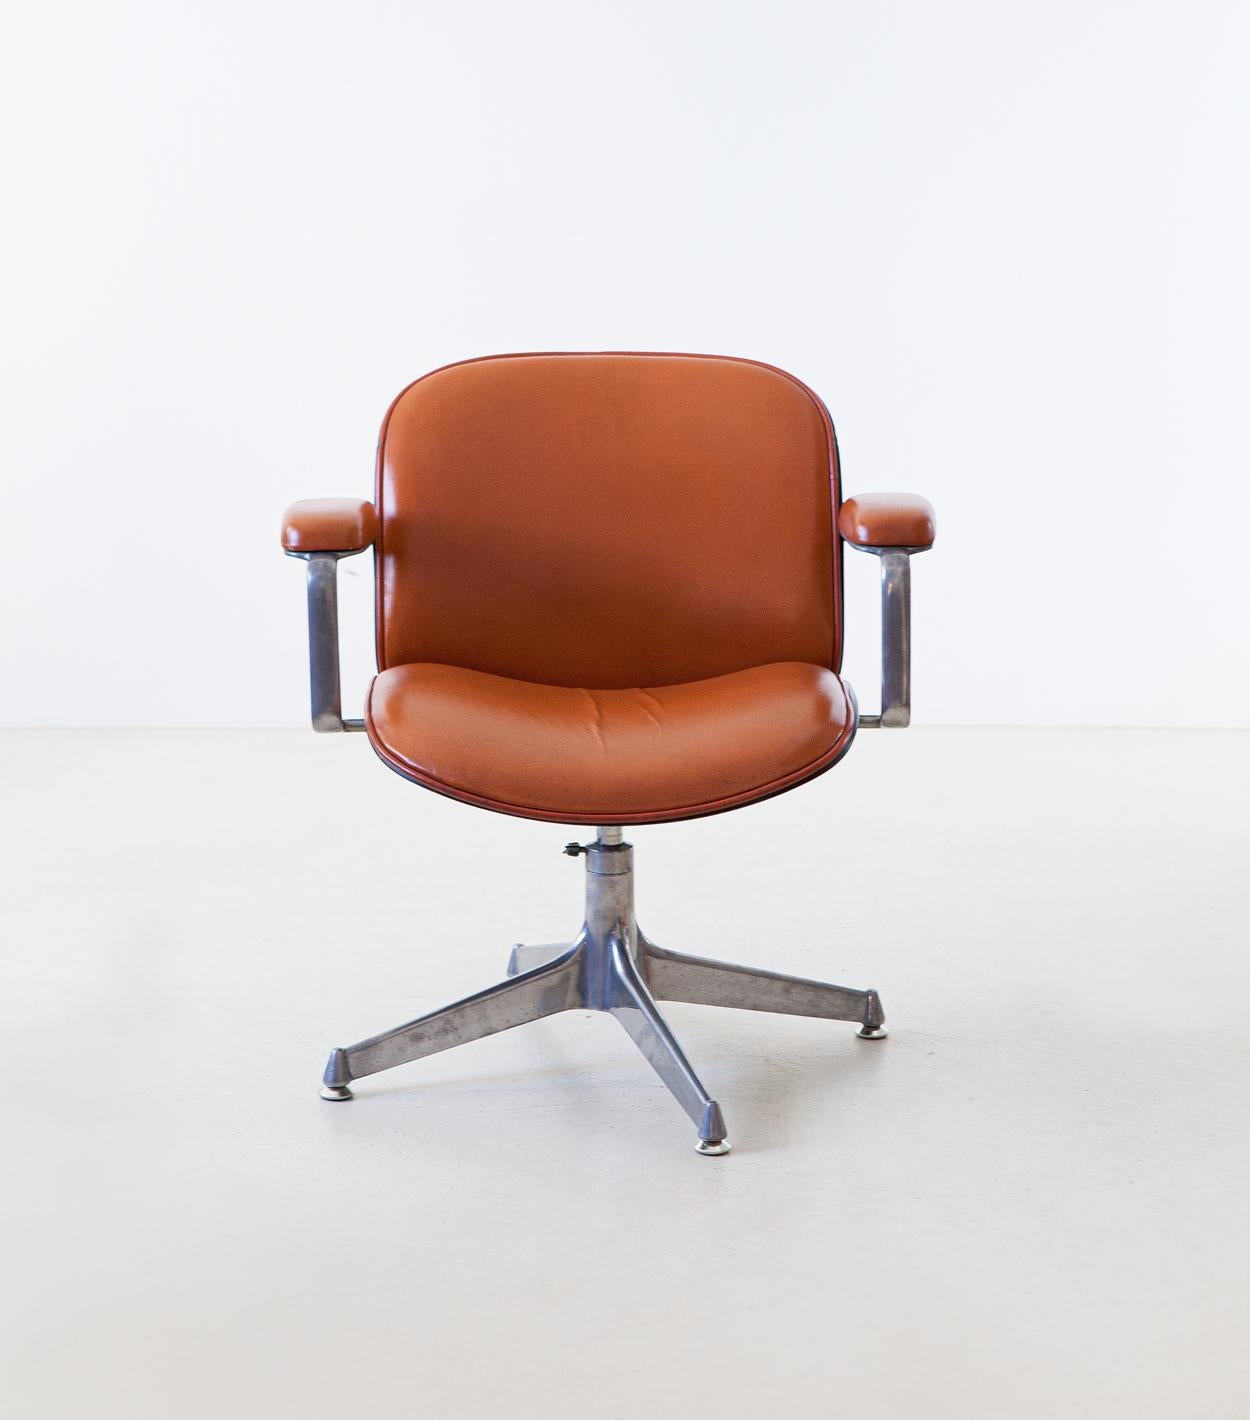 Office swivel armchair designed by Ico Parisi and produced by M.I.M. (Mobili Italiani Moderni) Roma, Italy

1st series of the 1950s.

Natural leather upholstery.

Mid-Century Modern design.

   